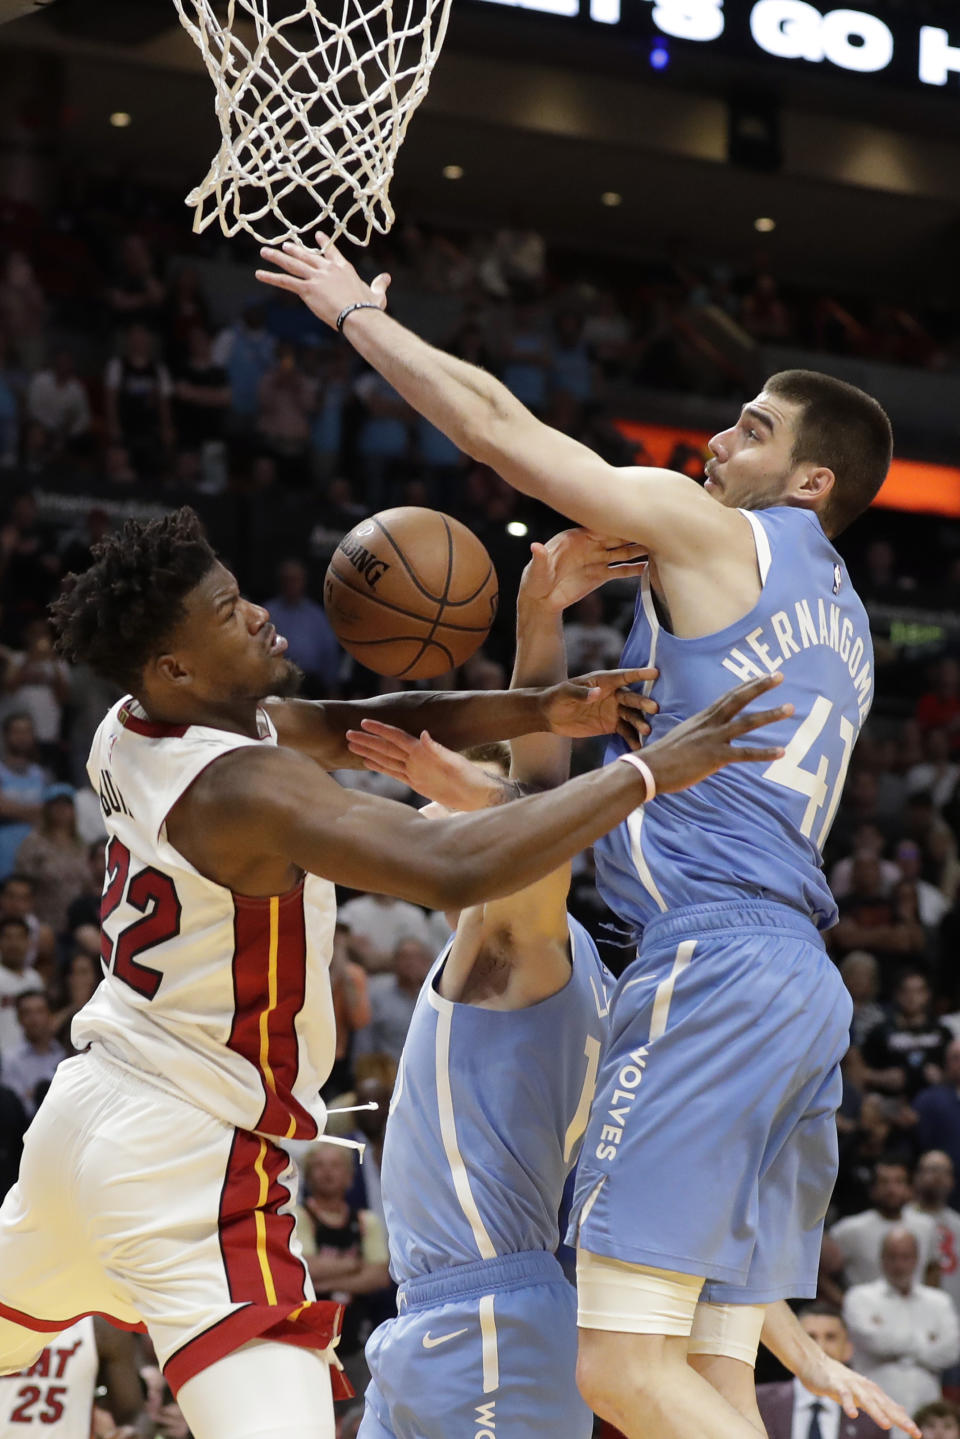 Miami Heat forward Jimmy Butler (22) goes up for a shot against Minnesota Timberwolves forwards Juancho Hernangomez (41) and Jake Layman, center, during the second half of an NBA basketball game, Wednesday, Feb. 26, 2020, in Miami. (AP Photo/Wilfredo Lee)